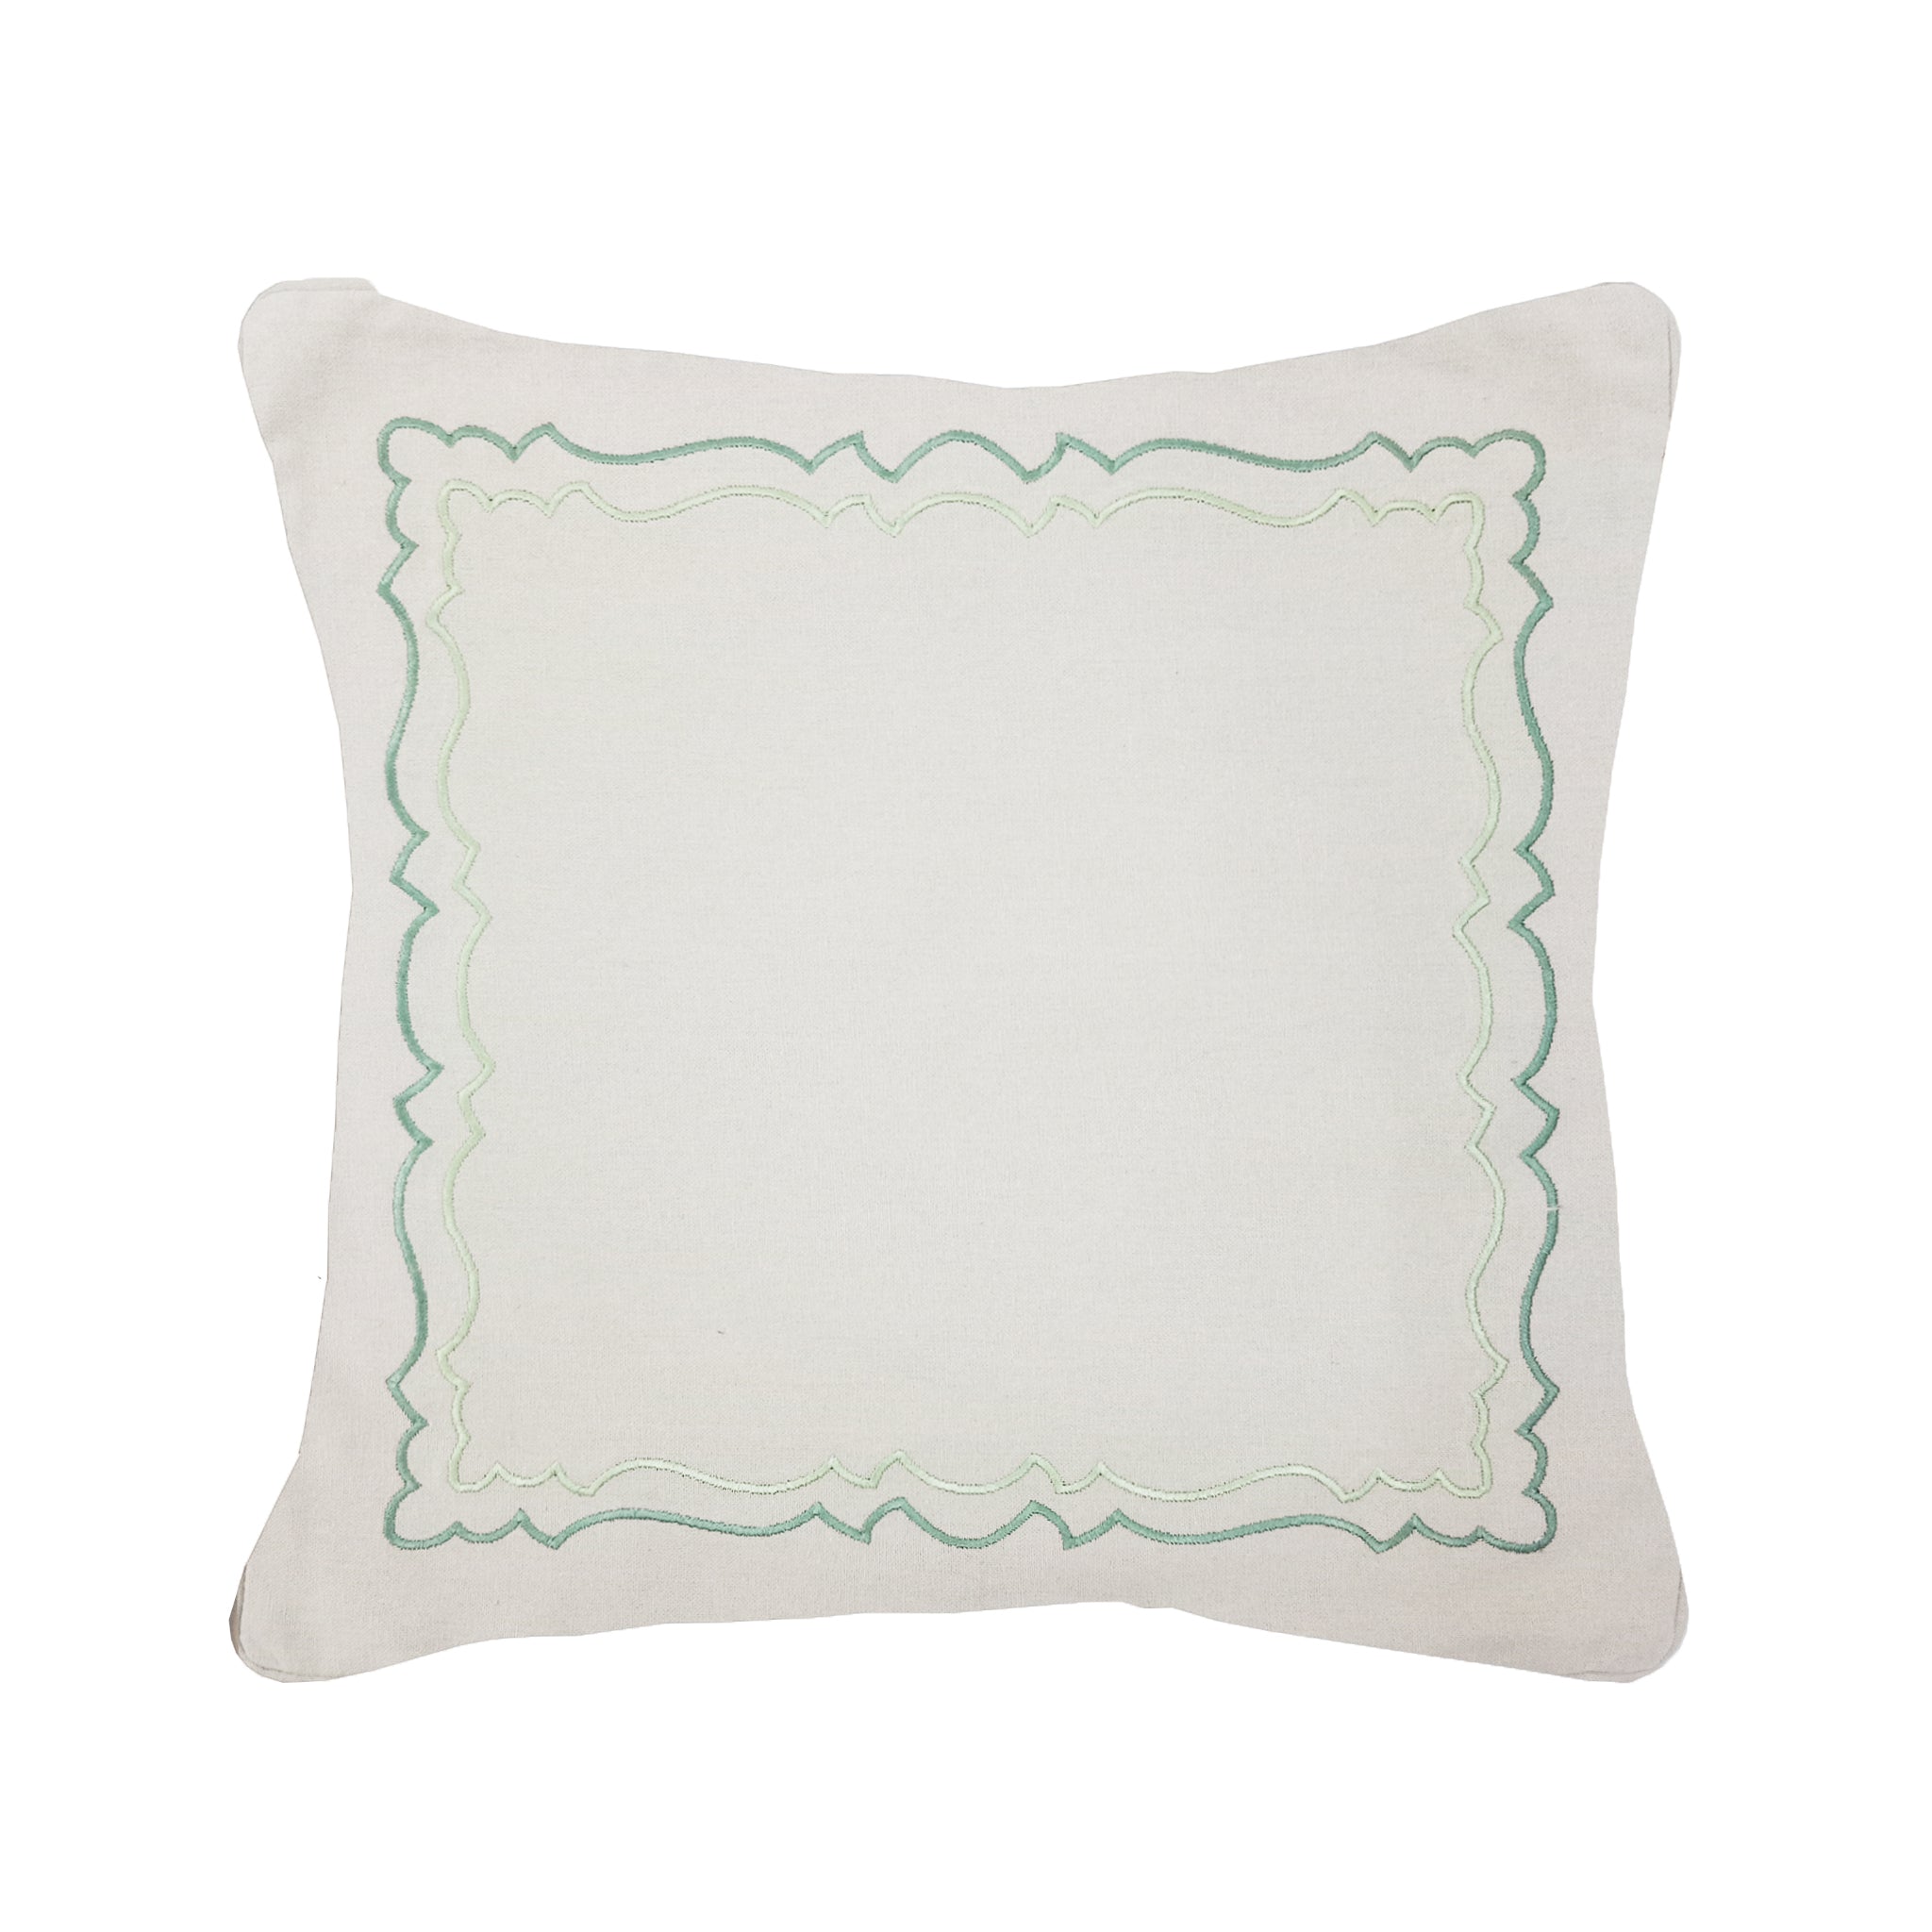 Scalloped Cushion Cover - Scalloped Greens